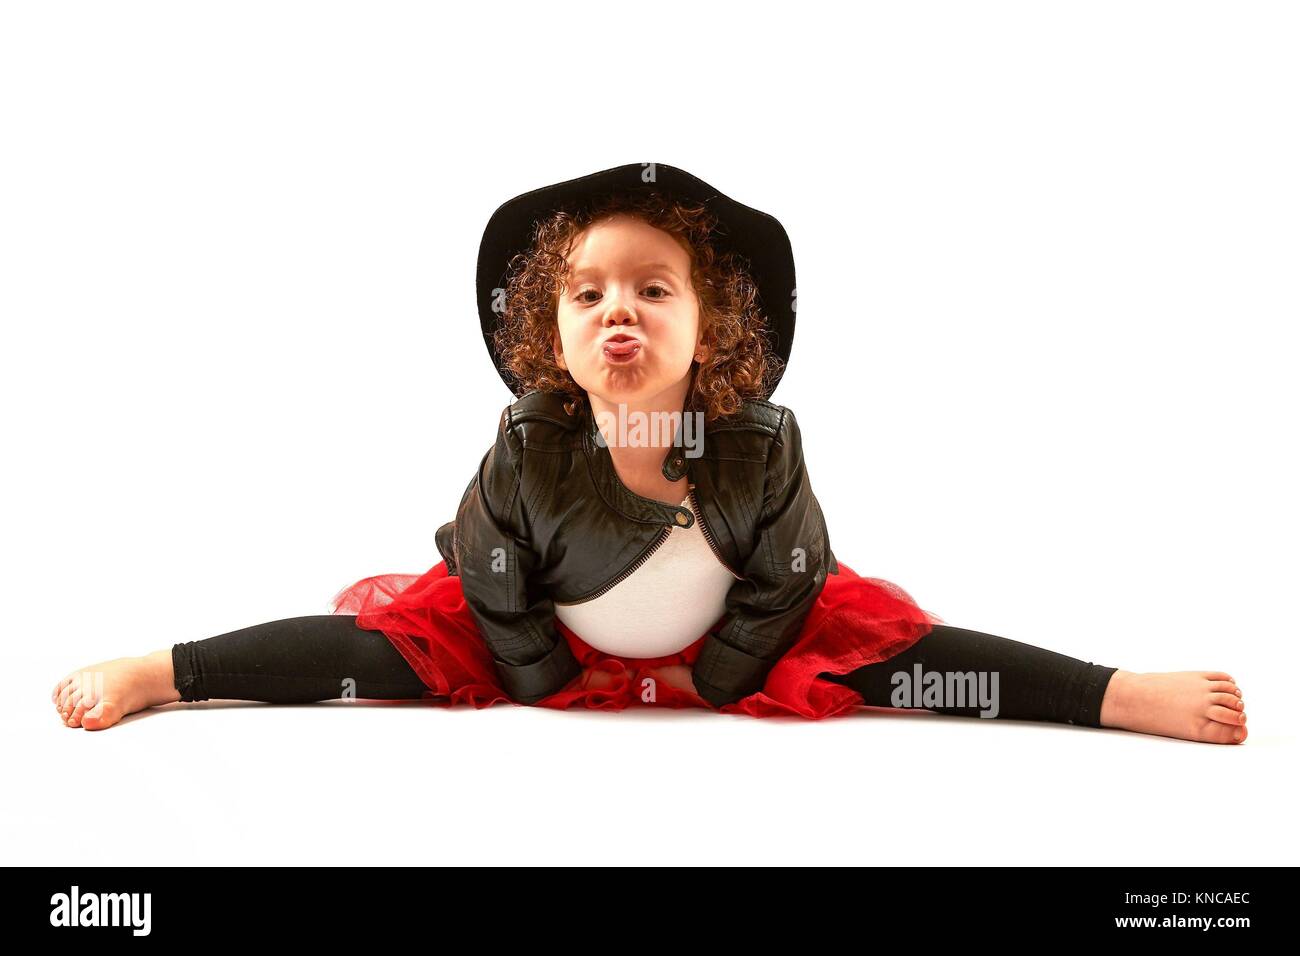 Little girl with black hat sitting and hamming. Stock Photo